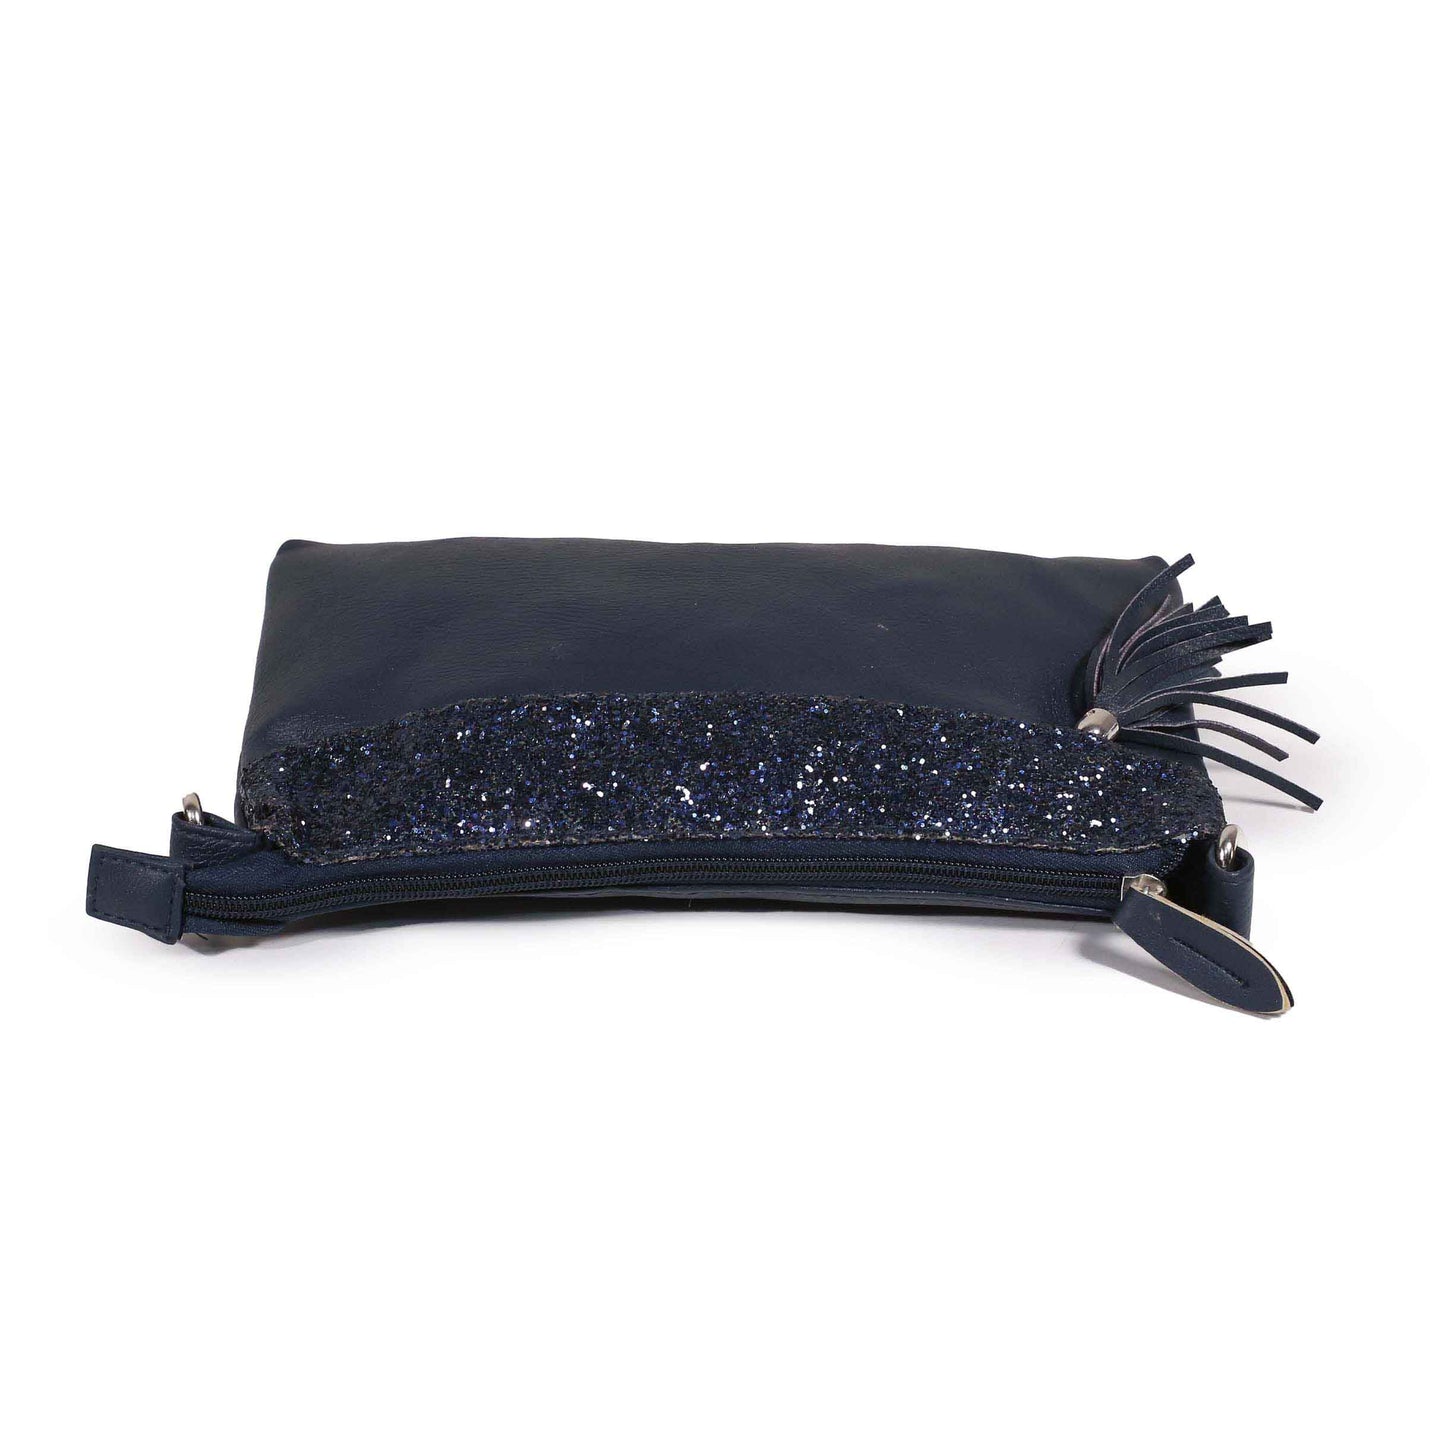 NATHALE ANDERSON POUCH